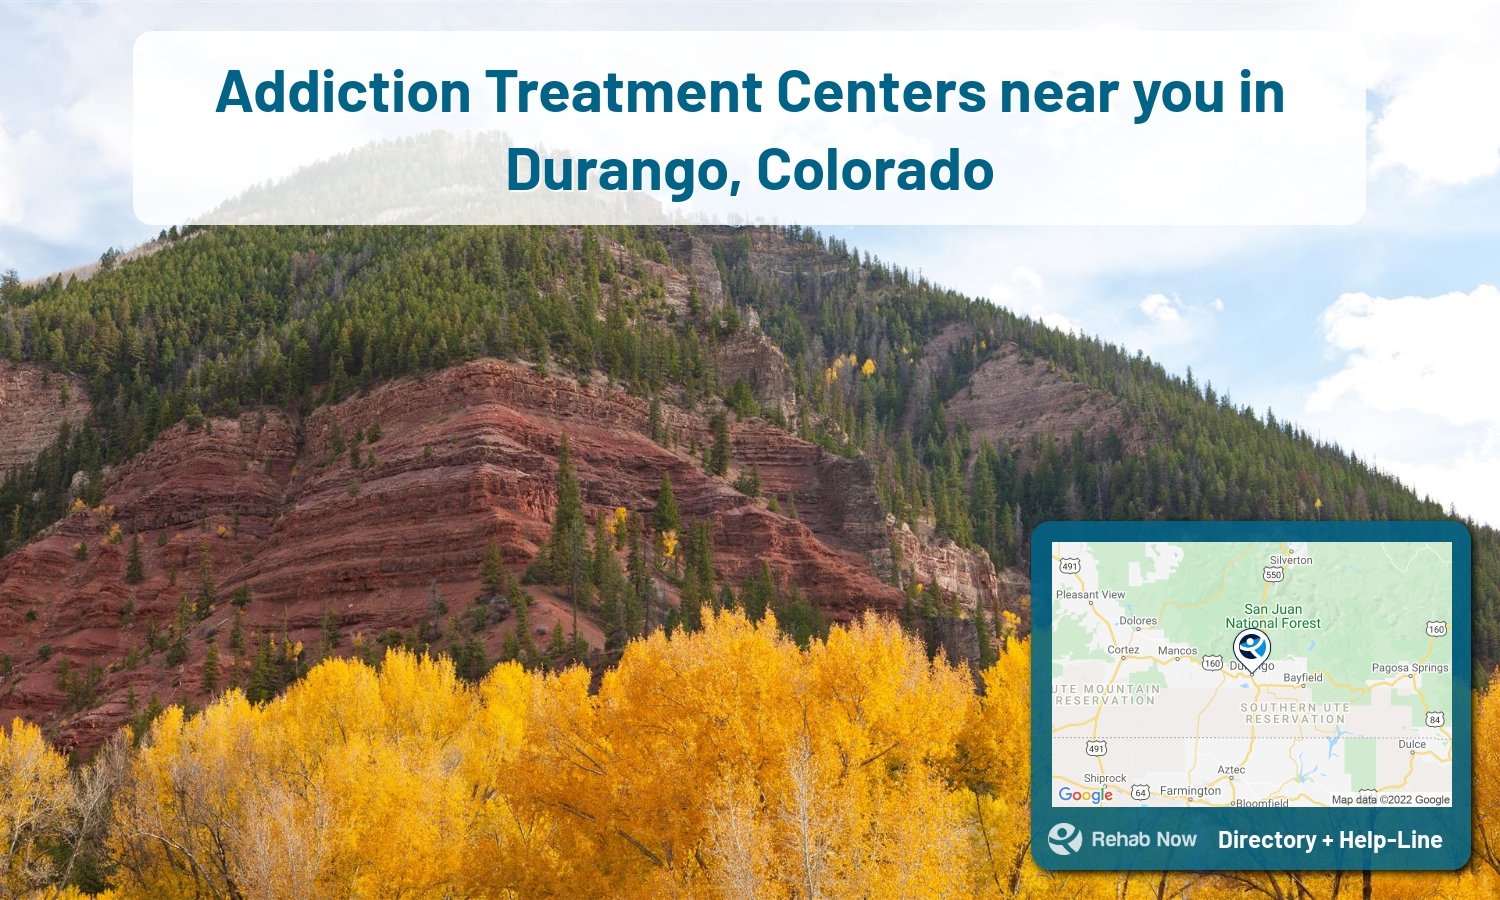 Durango, CO Treatment Centers. Find drug rehab in Durango, Colorado, or detox and treatment programs. Get the right help now!